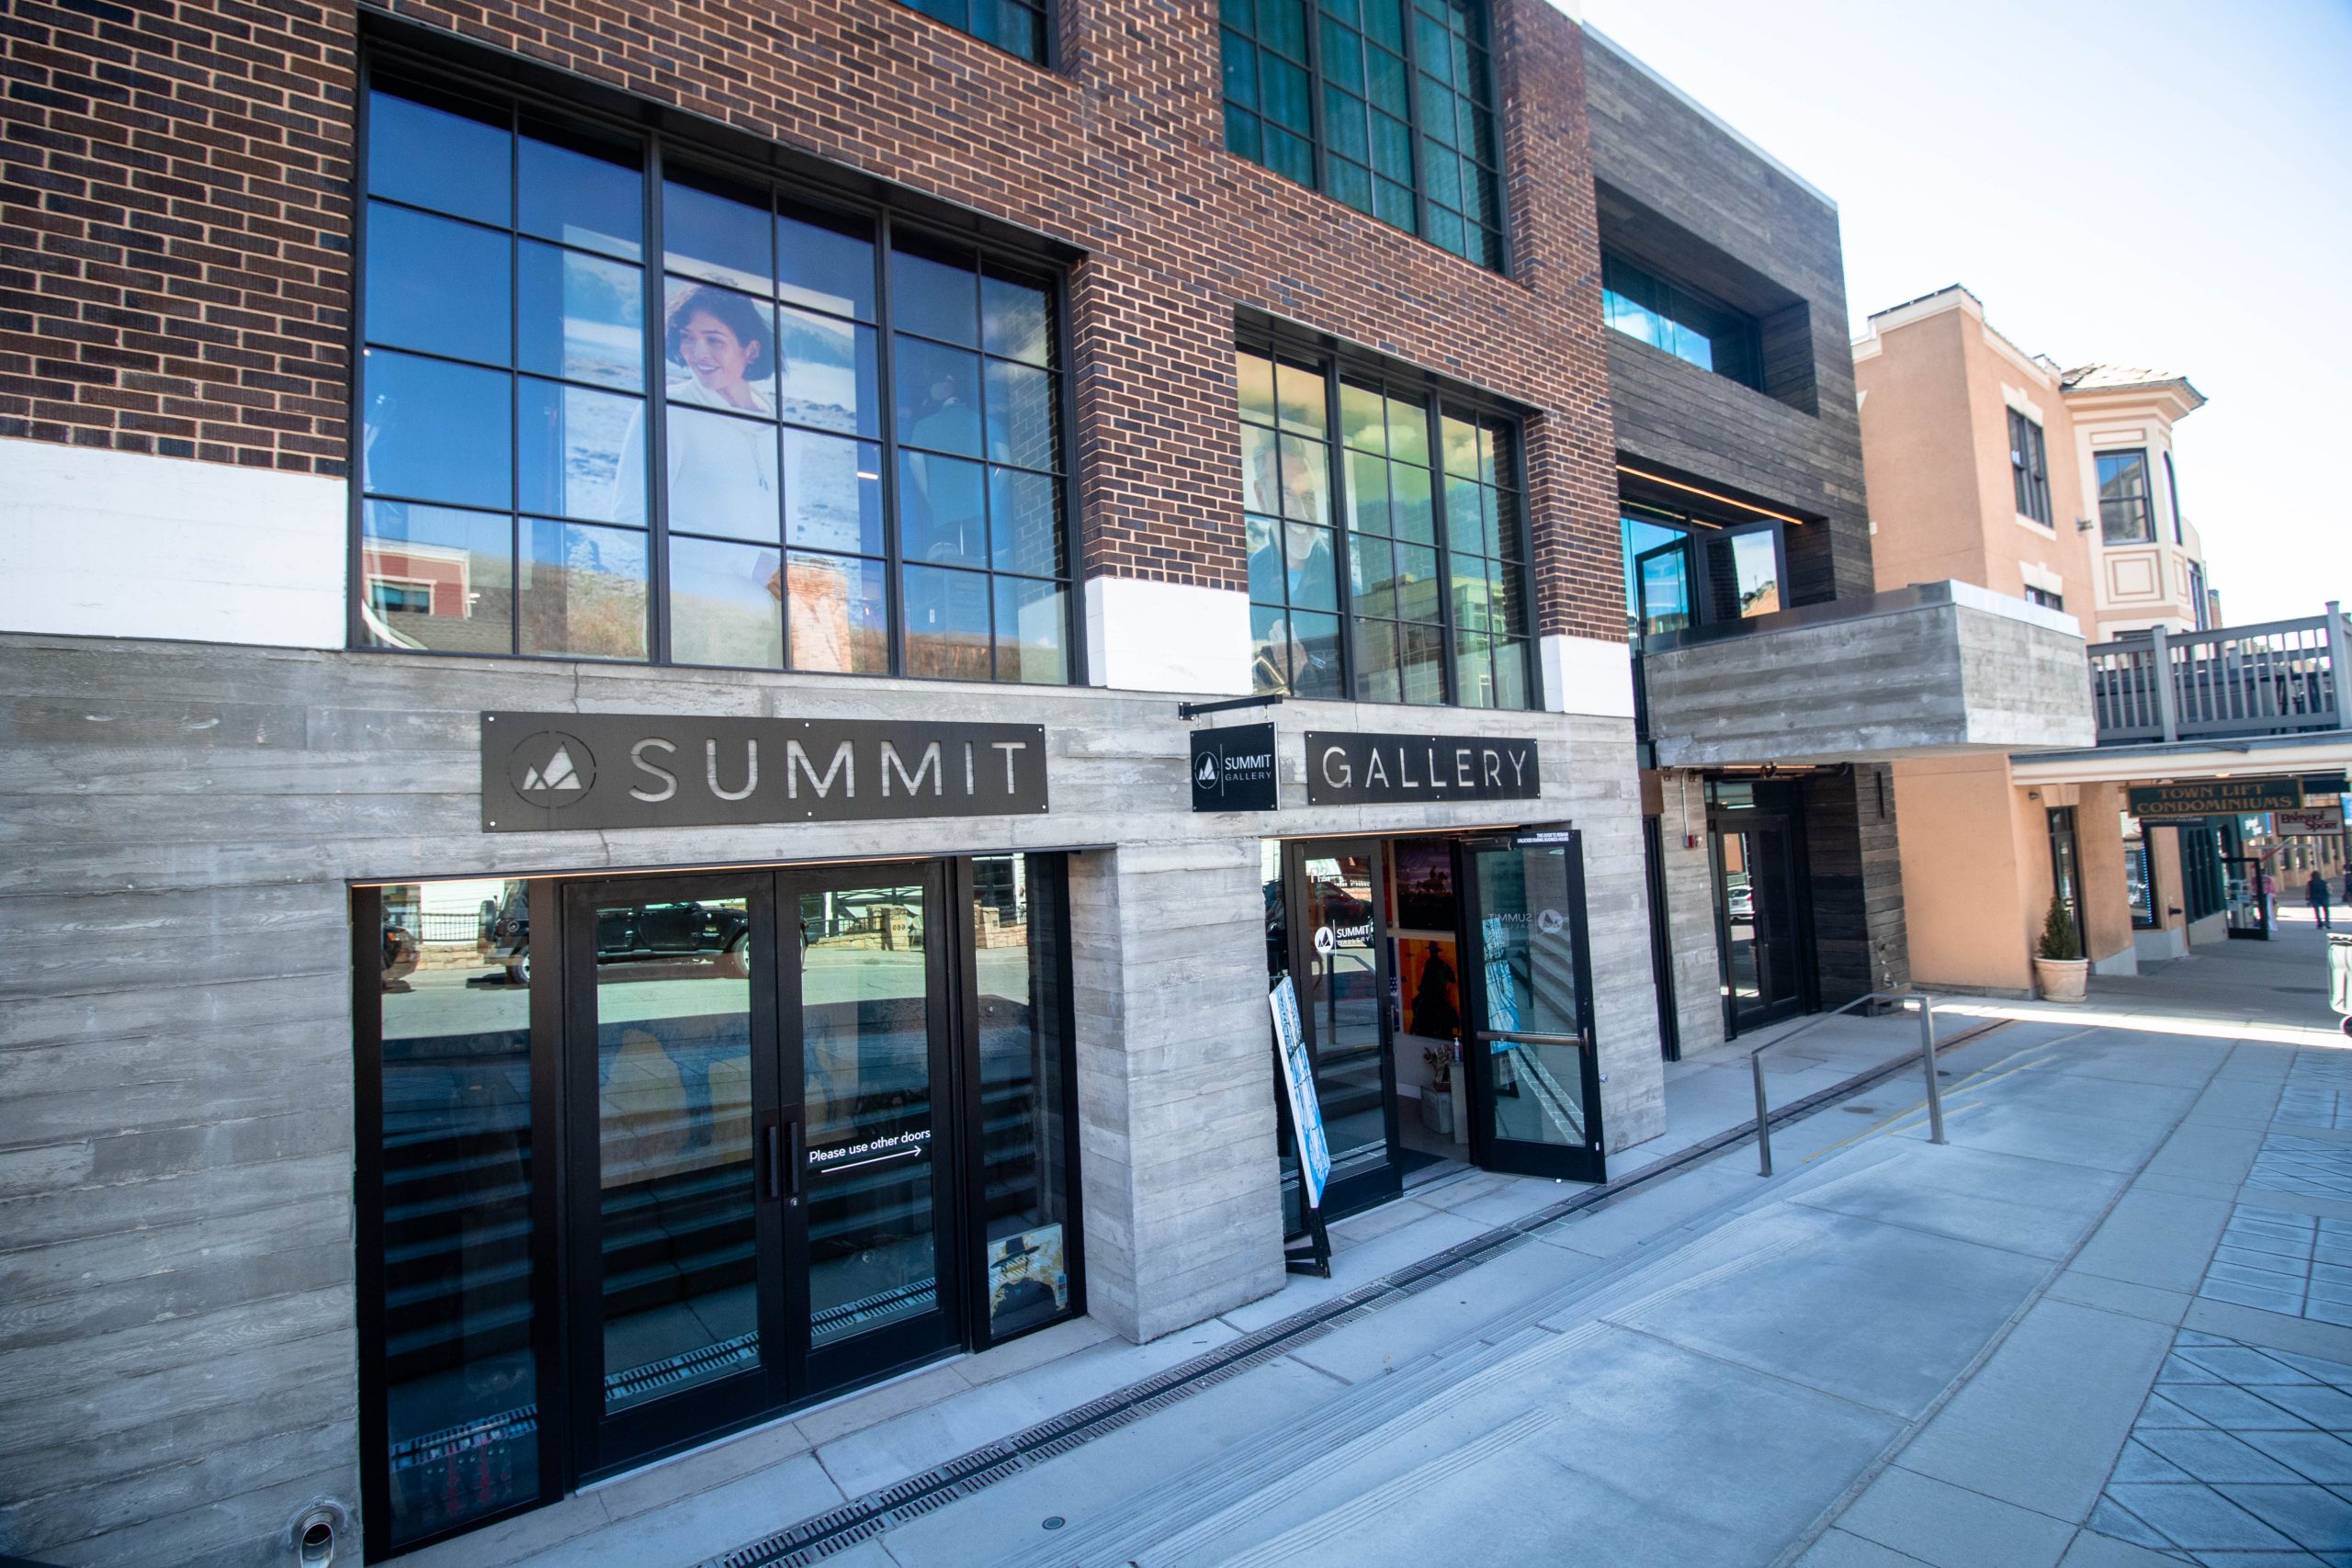 Summit Gallery is one of many galleries in Park City.